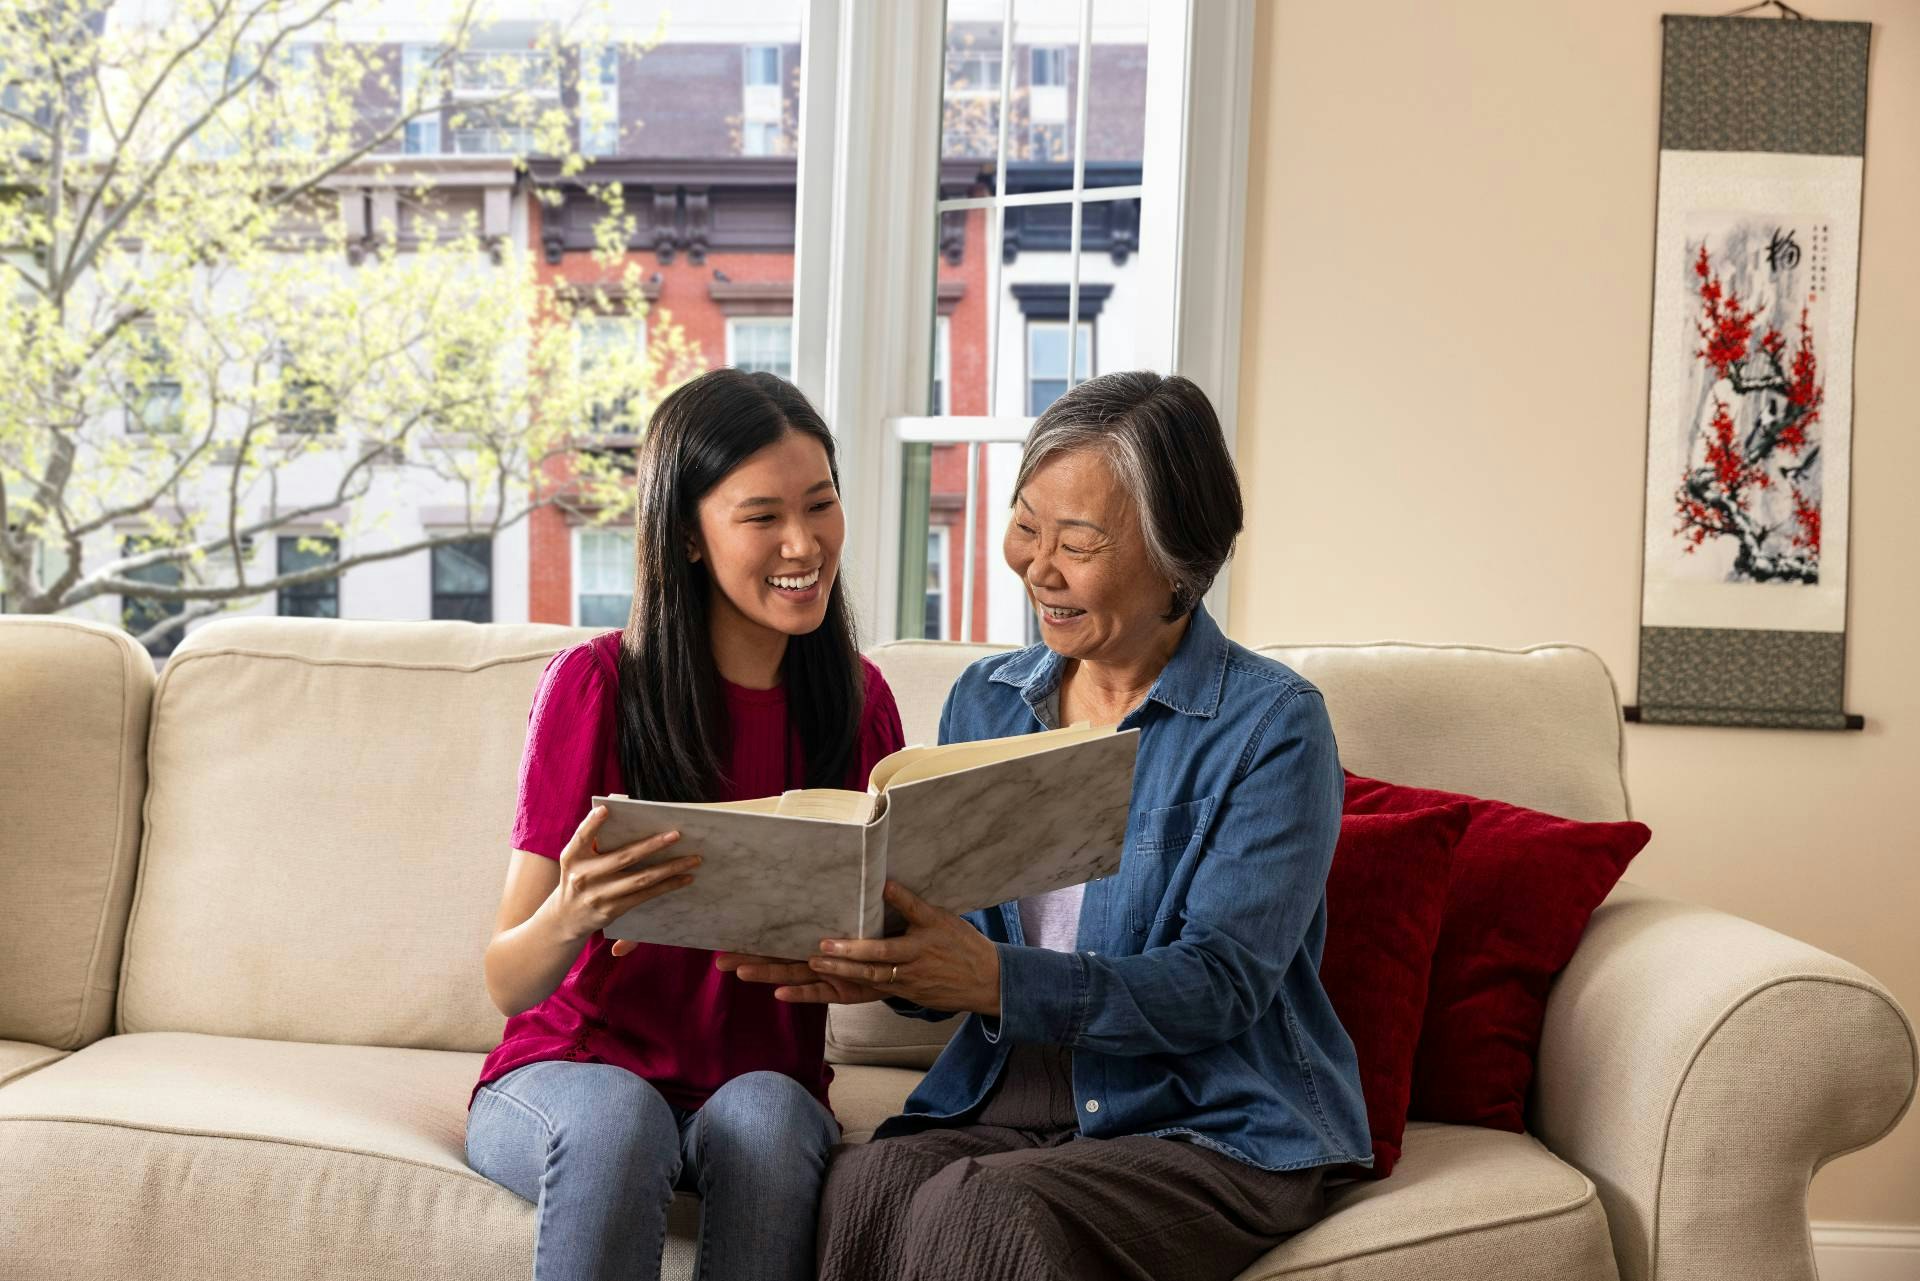 A woman and her adult daughter sit on the couch looking at a book together